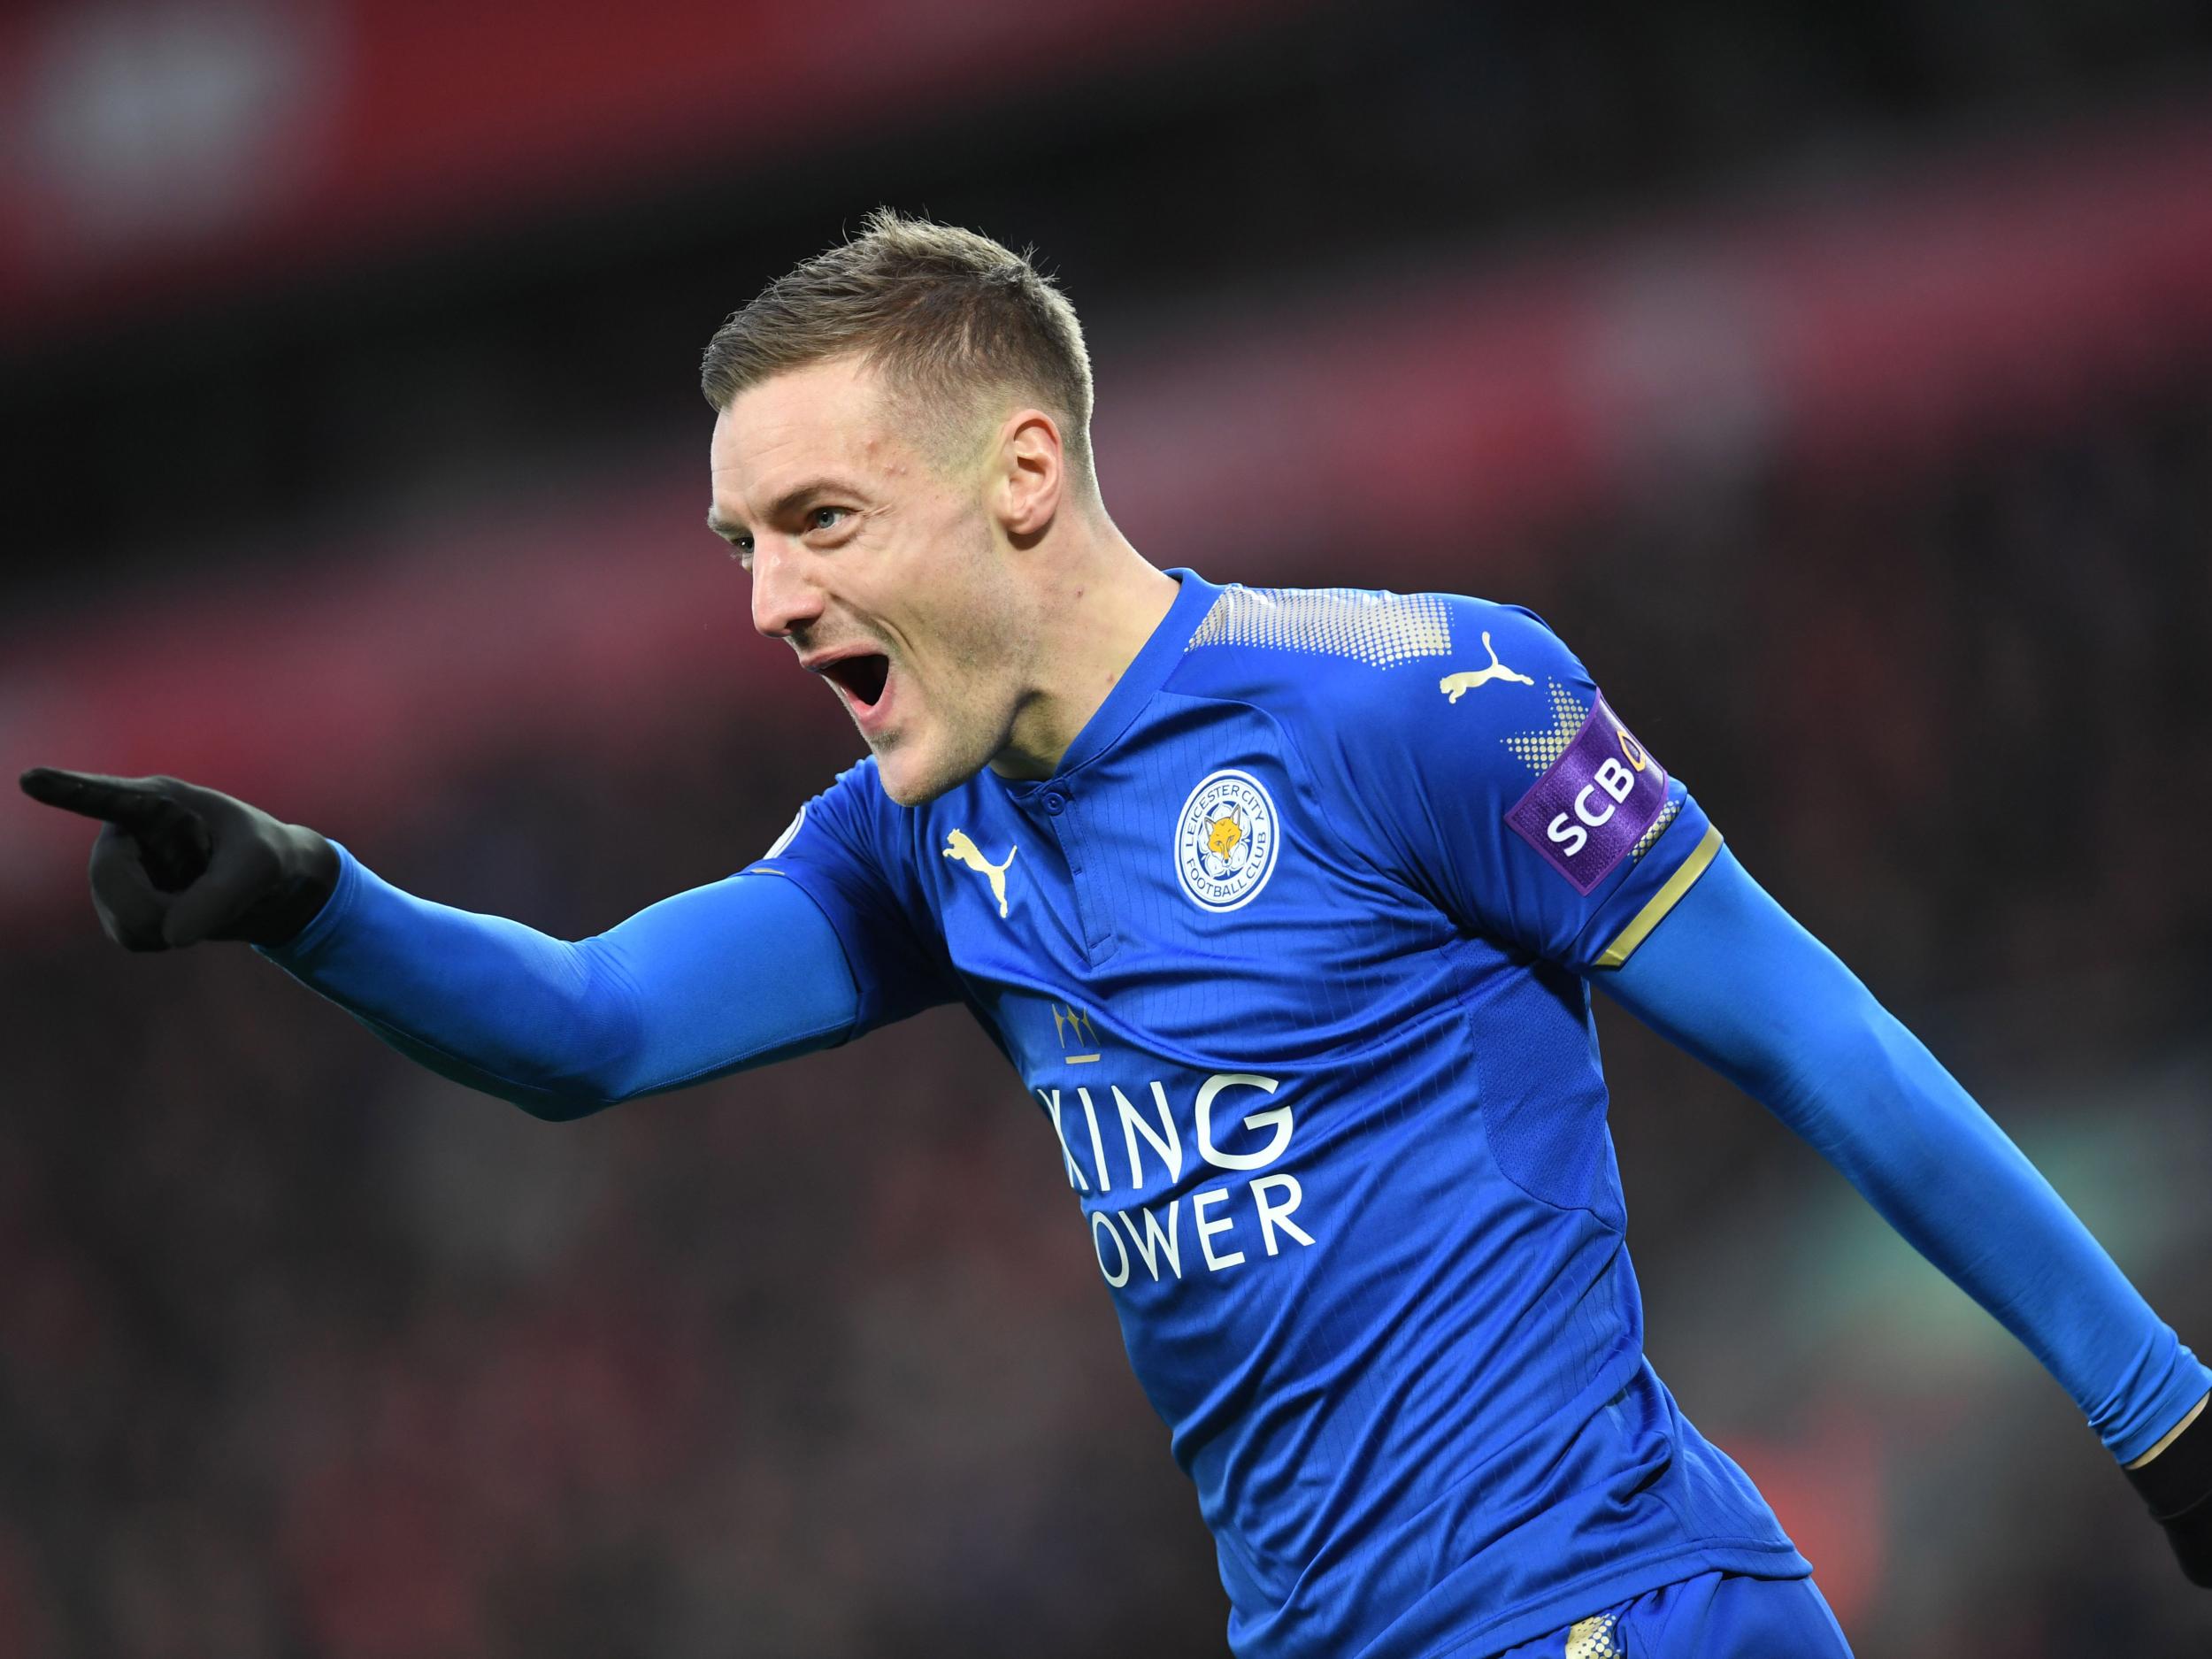 Jamie Vardy ends transfer speculation and commits long-term future to Leicester City